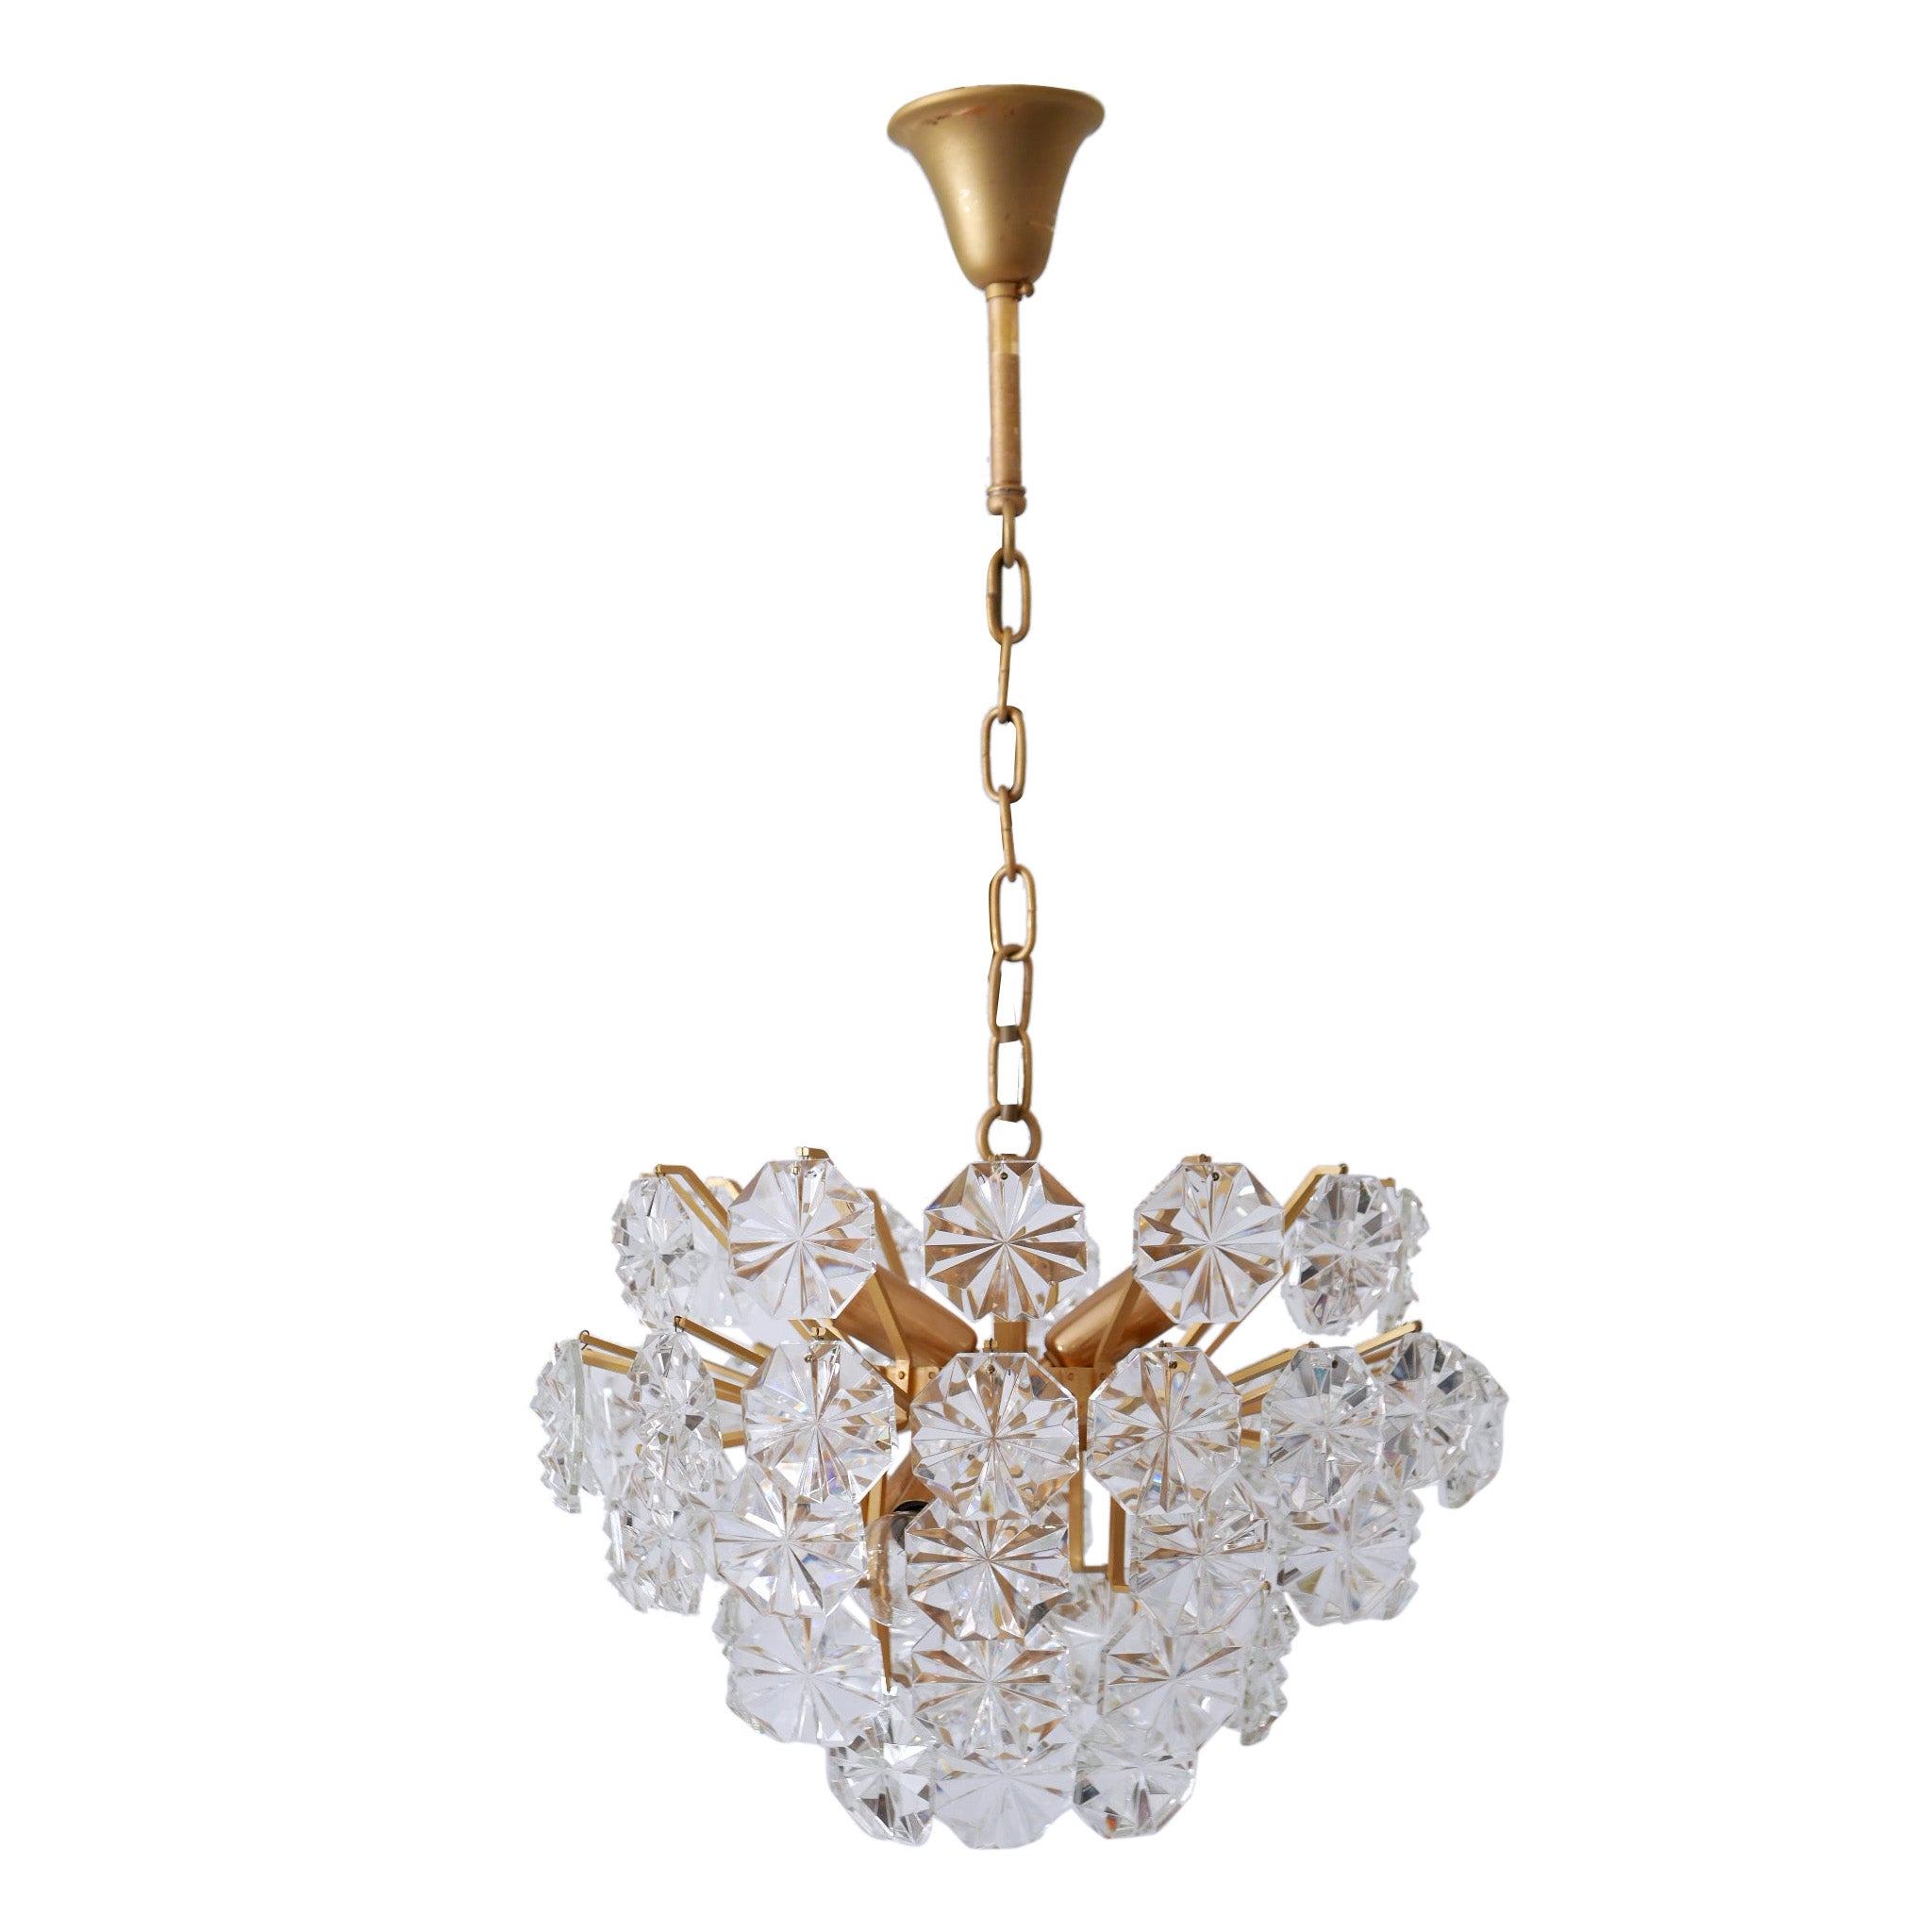 Elegant Mid Century Modern Crystal Chandelier by Christoph Palme Germany 1970s For Sale